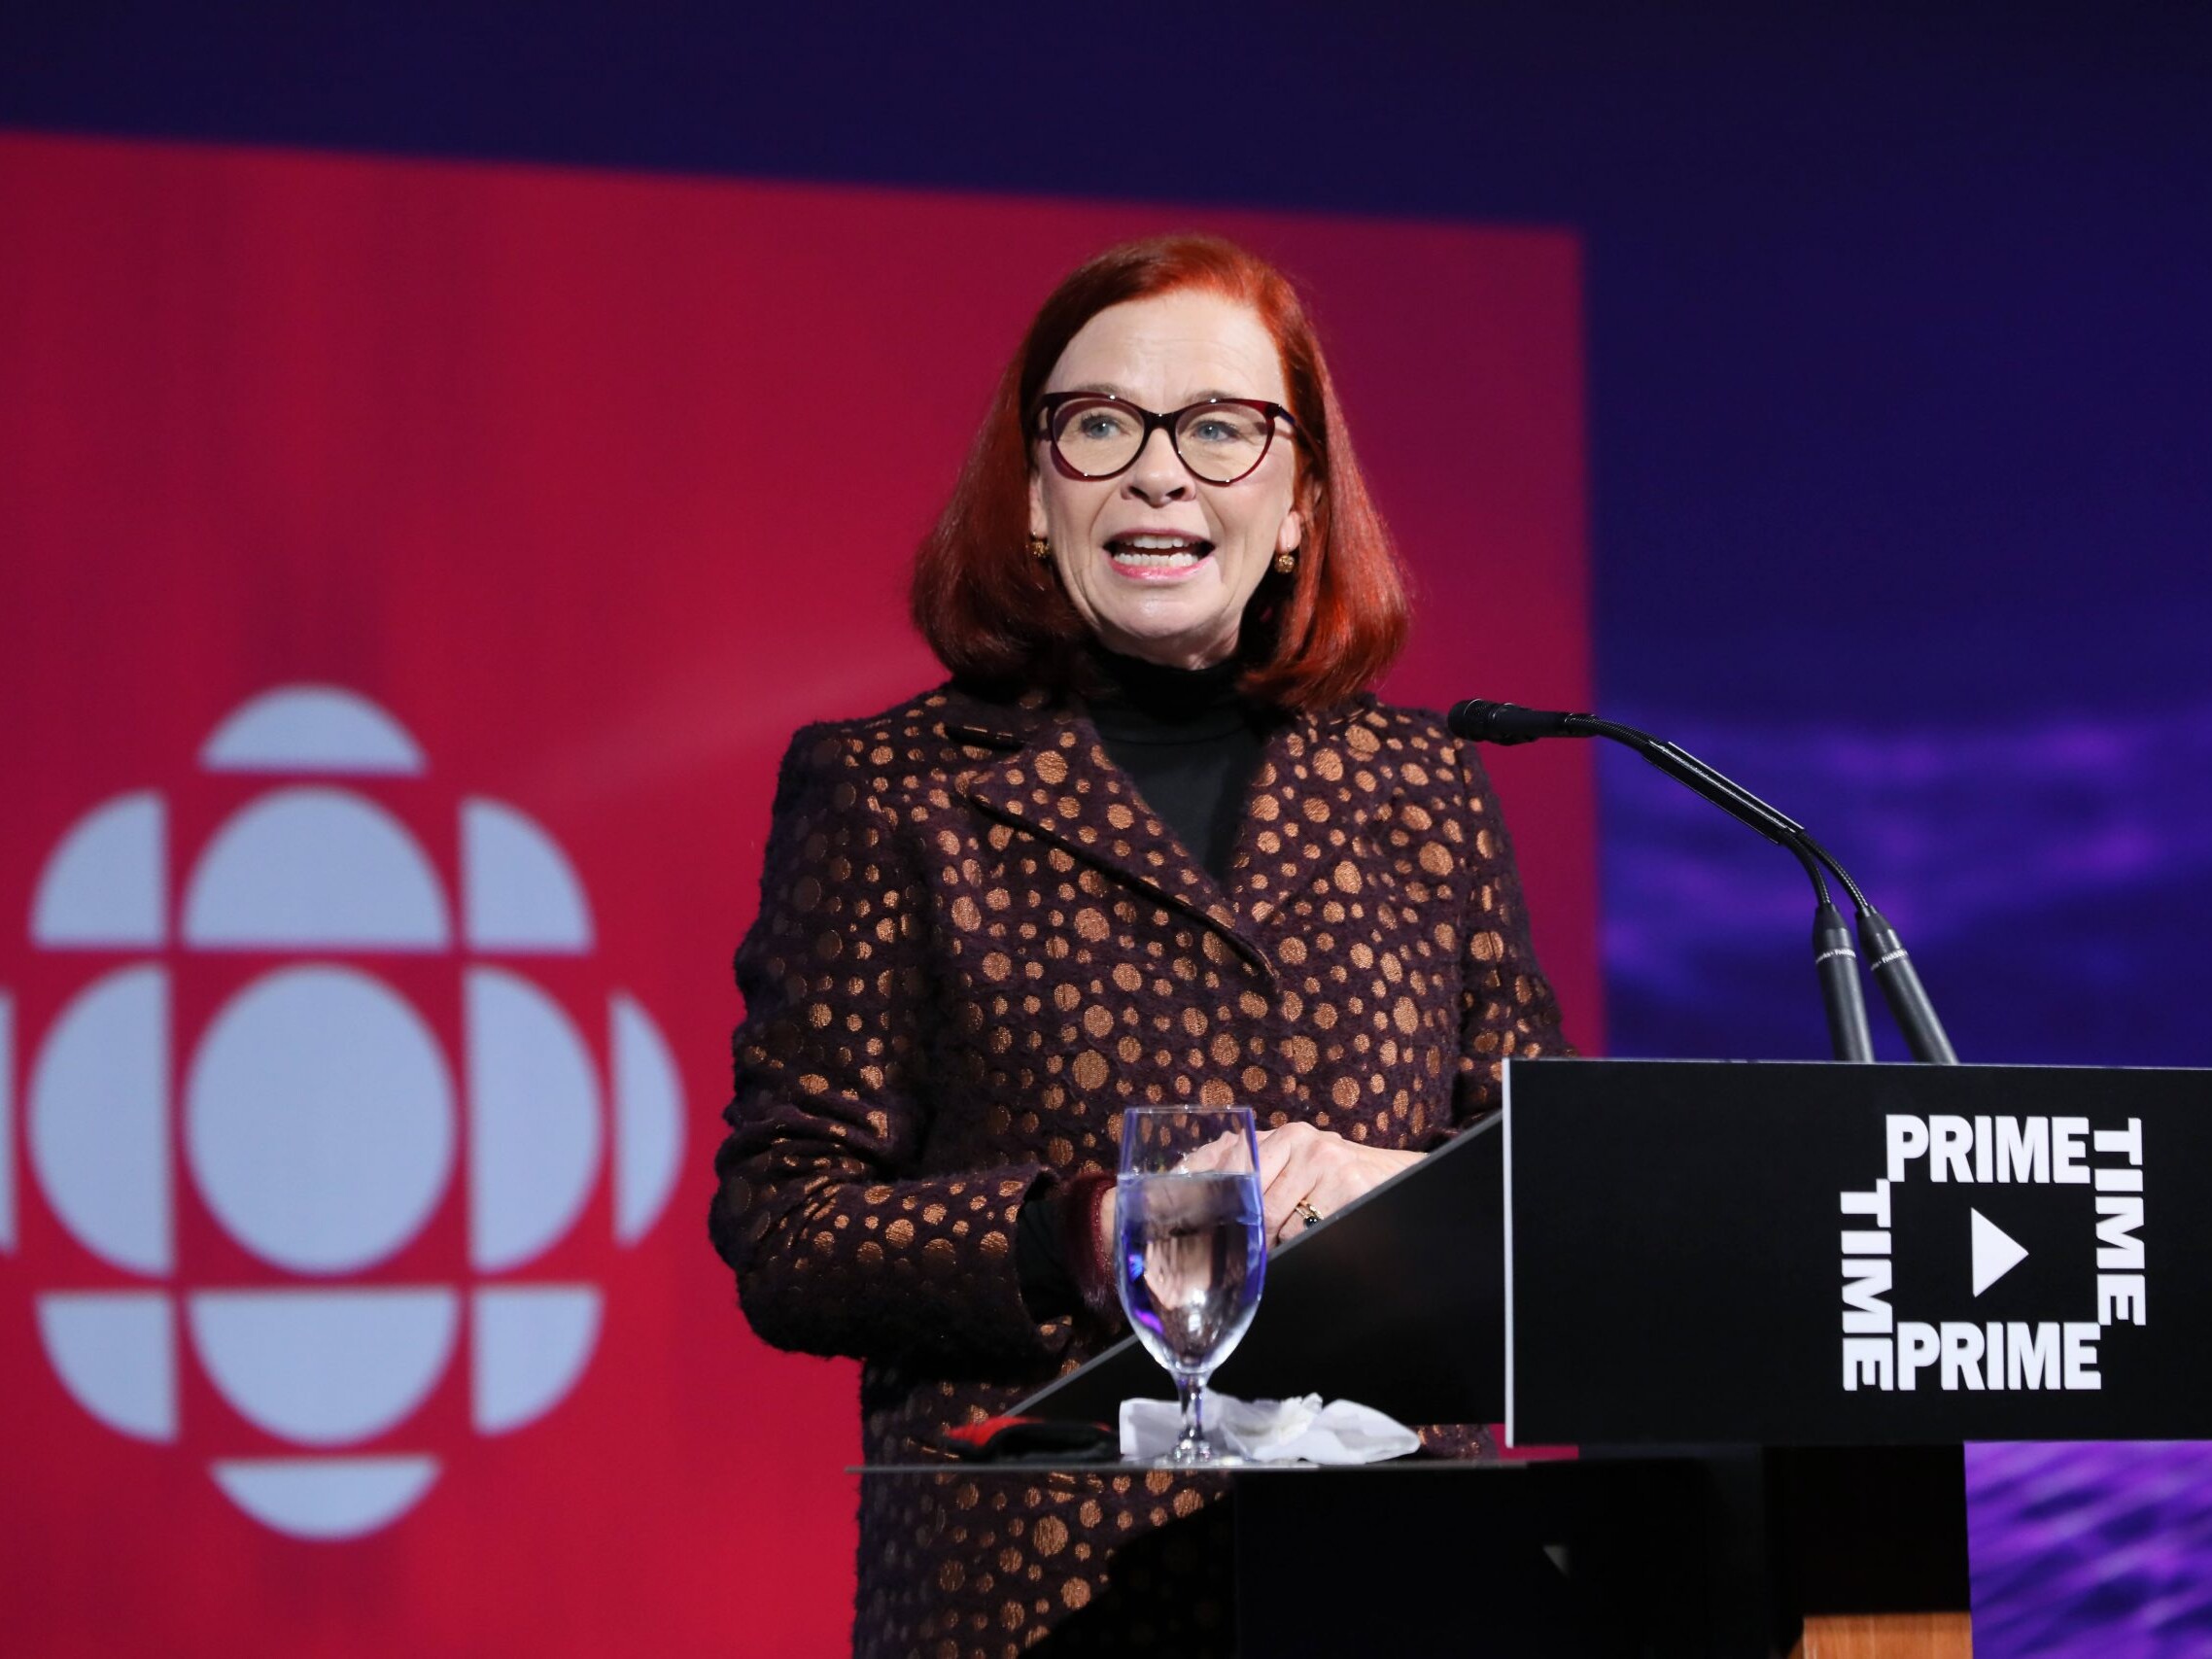 Catherine Tait speaking at a podium in front of the CBC gem logo.